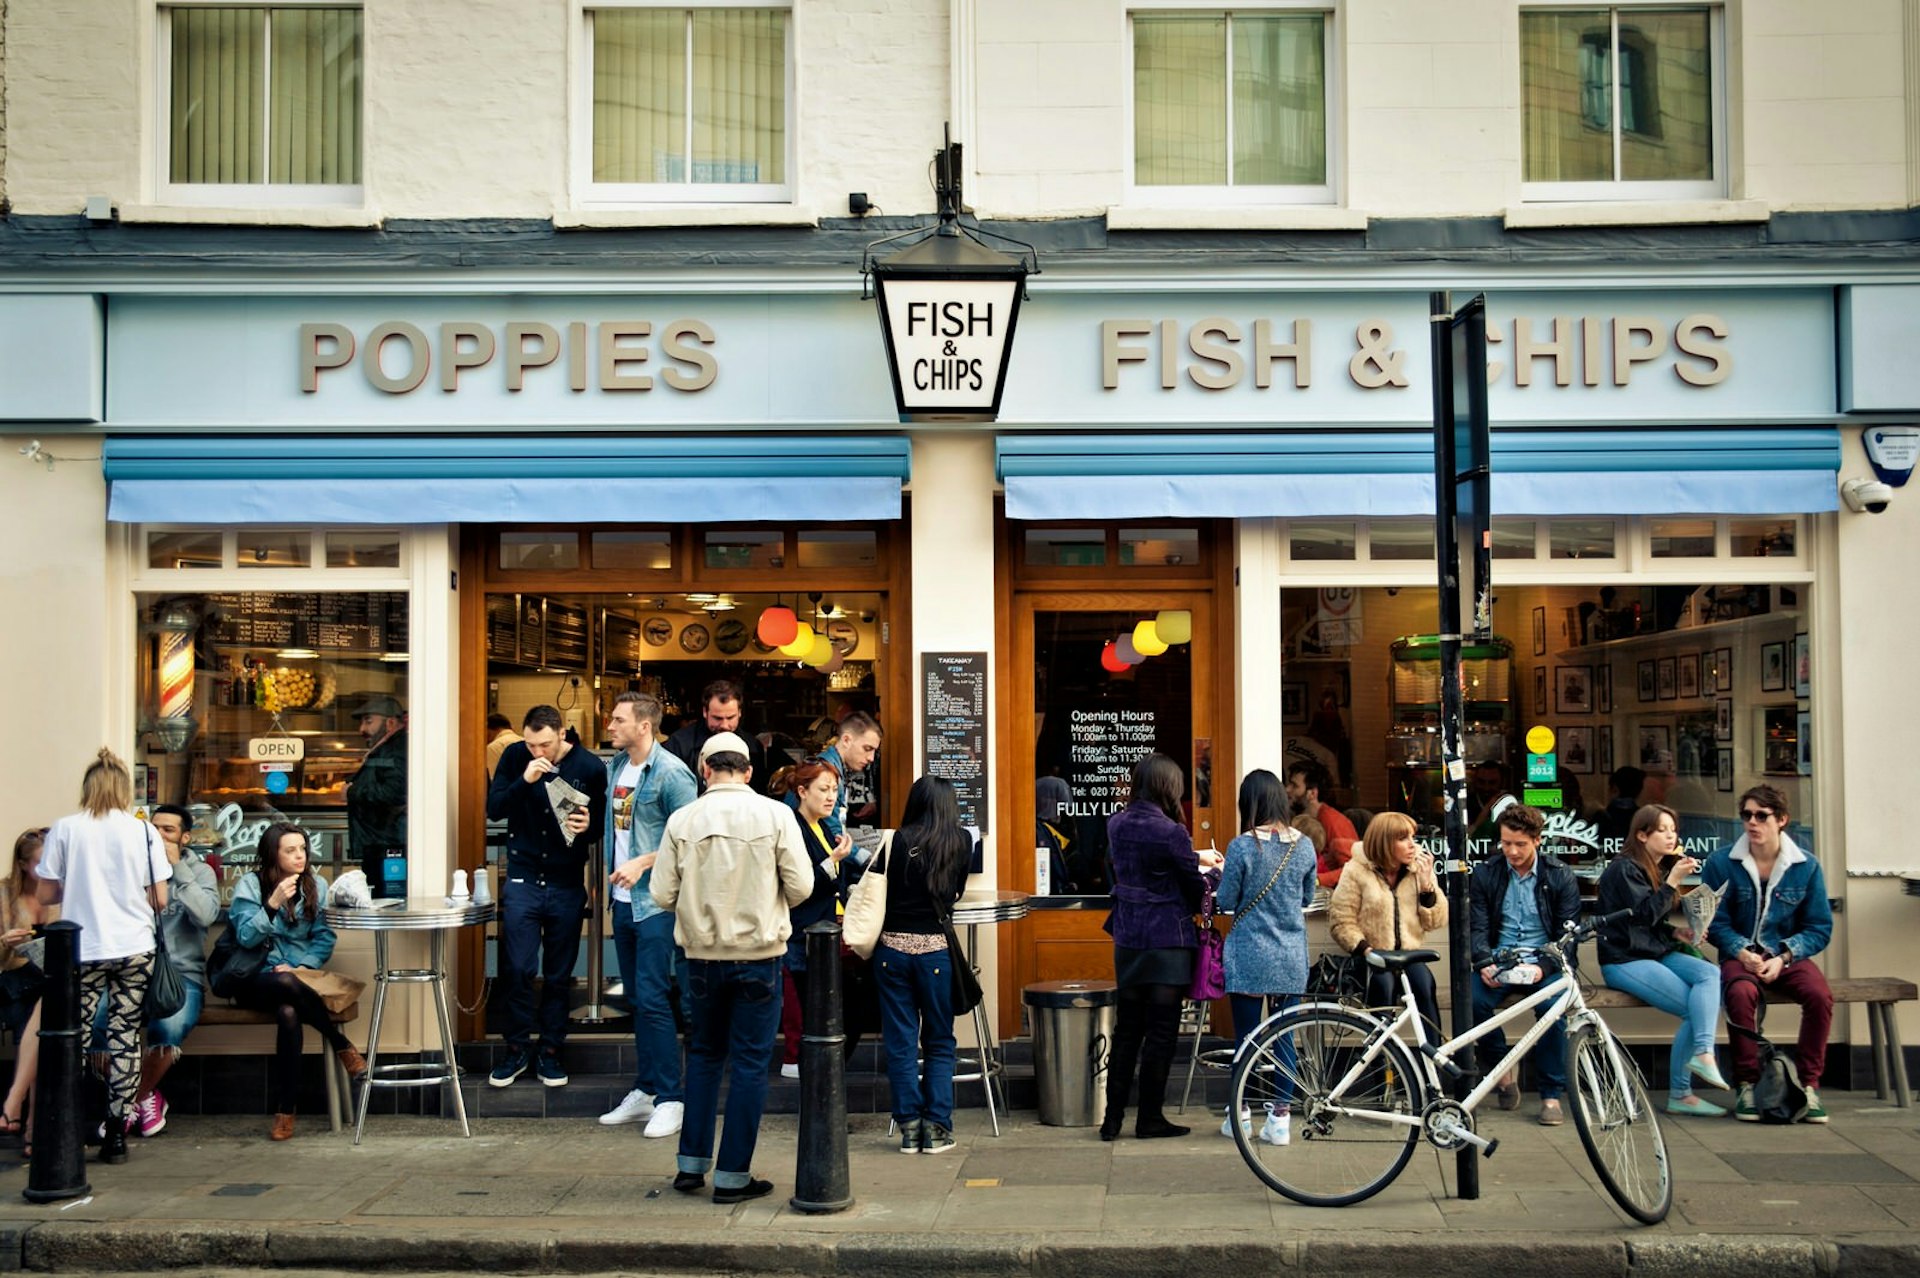 Poppie's fish and chips shop, London